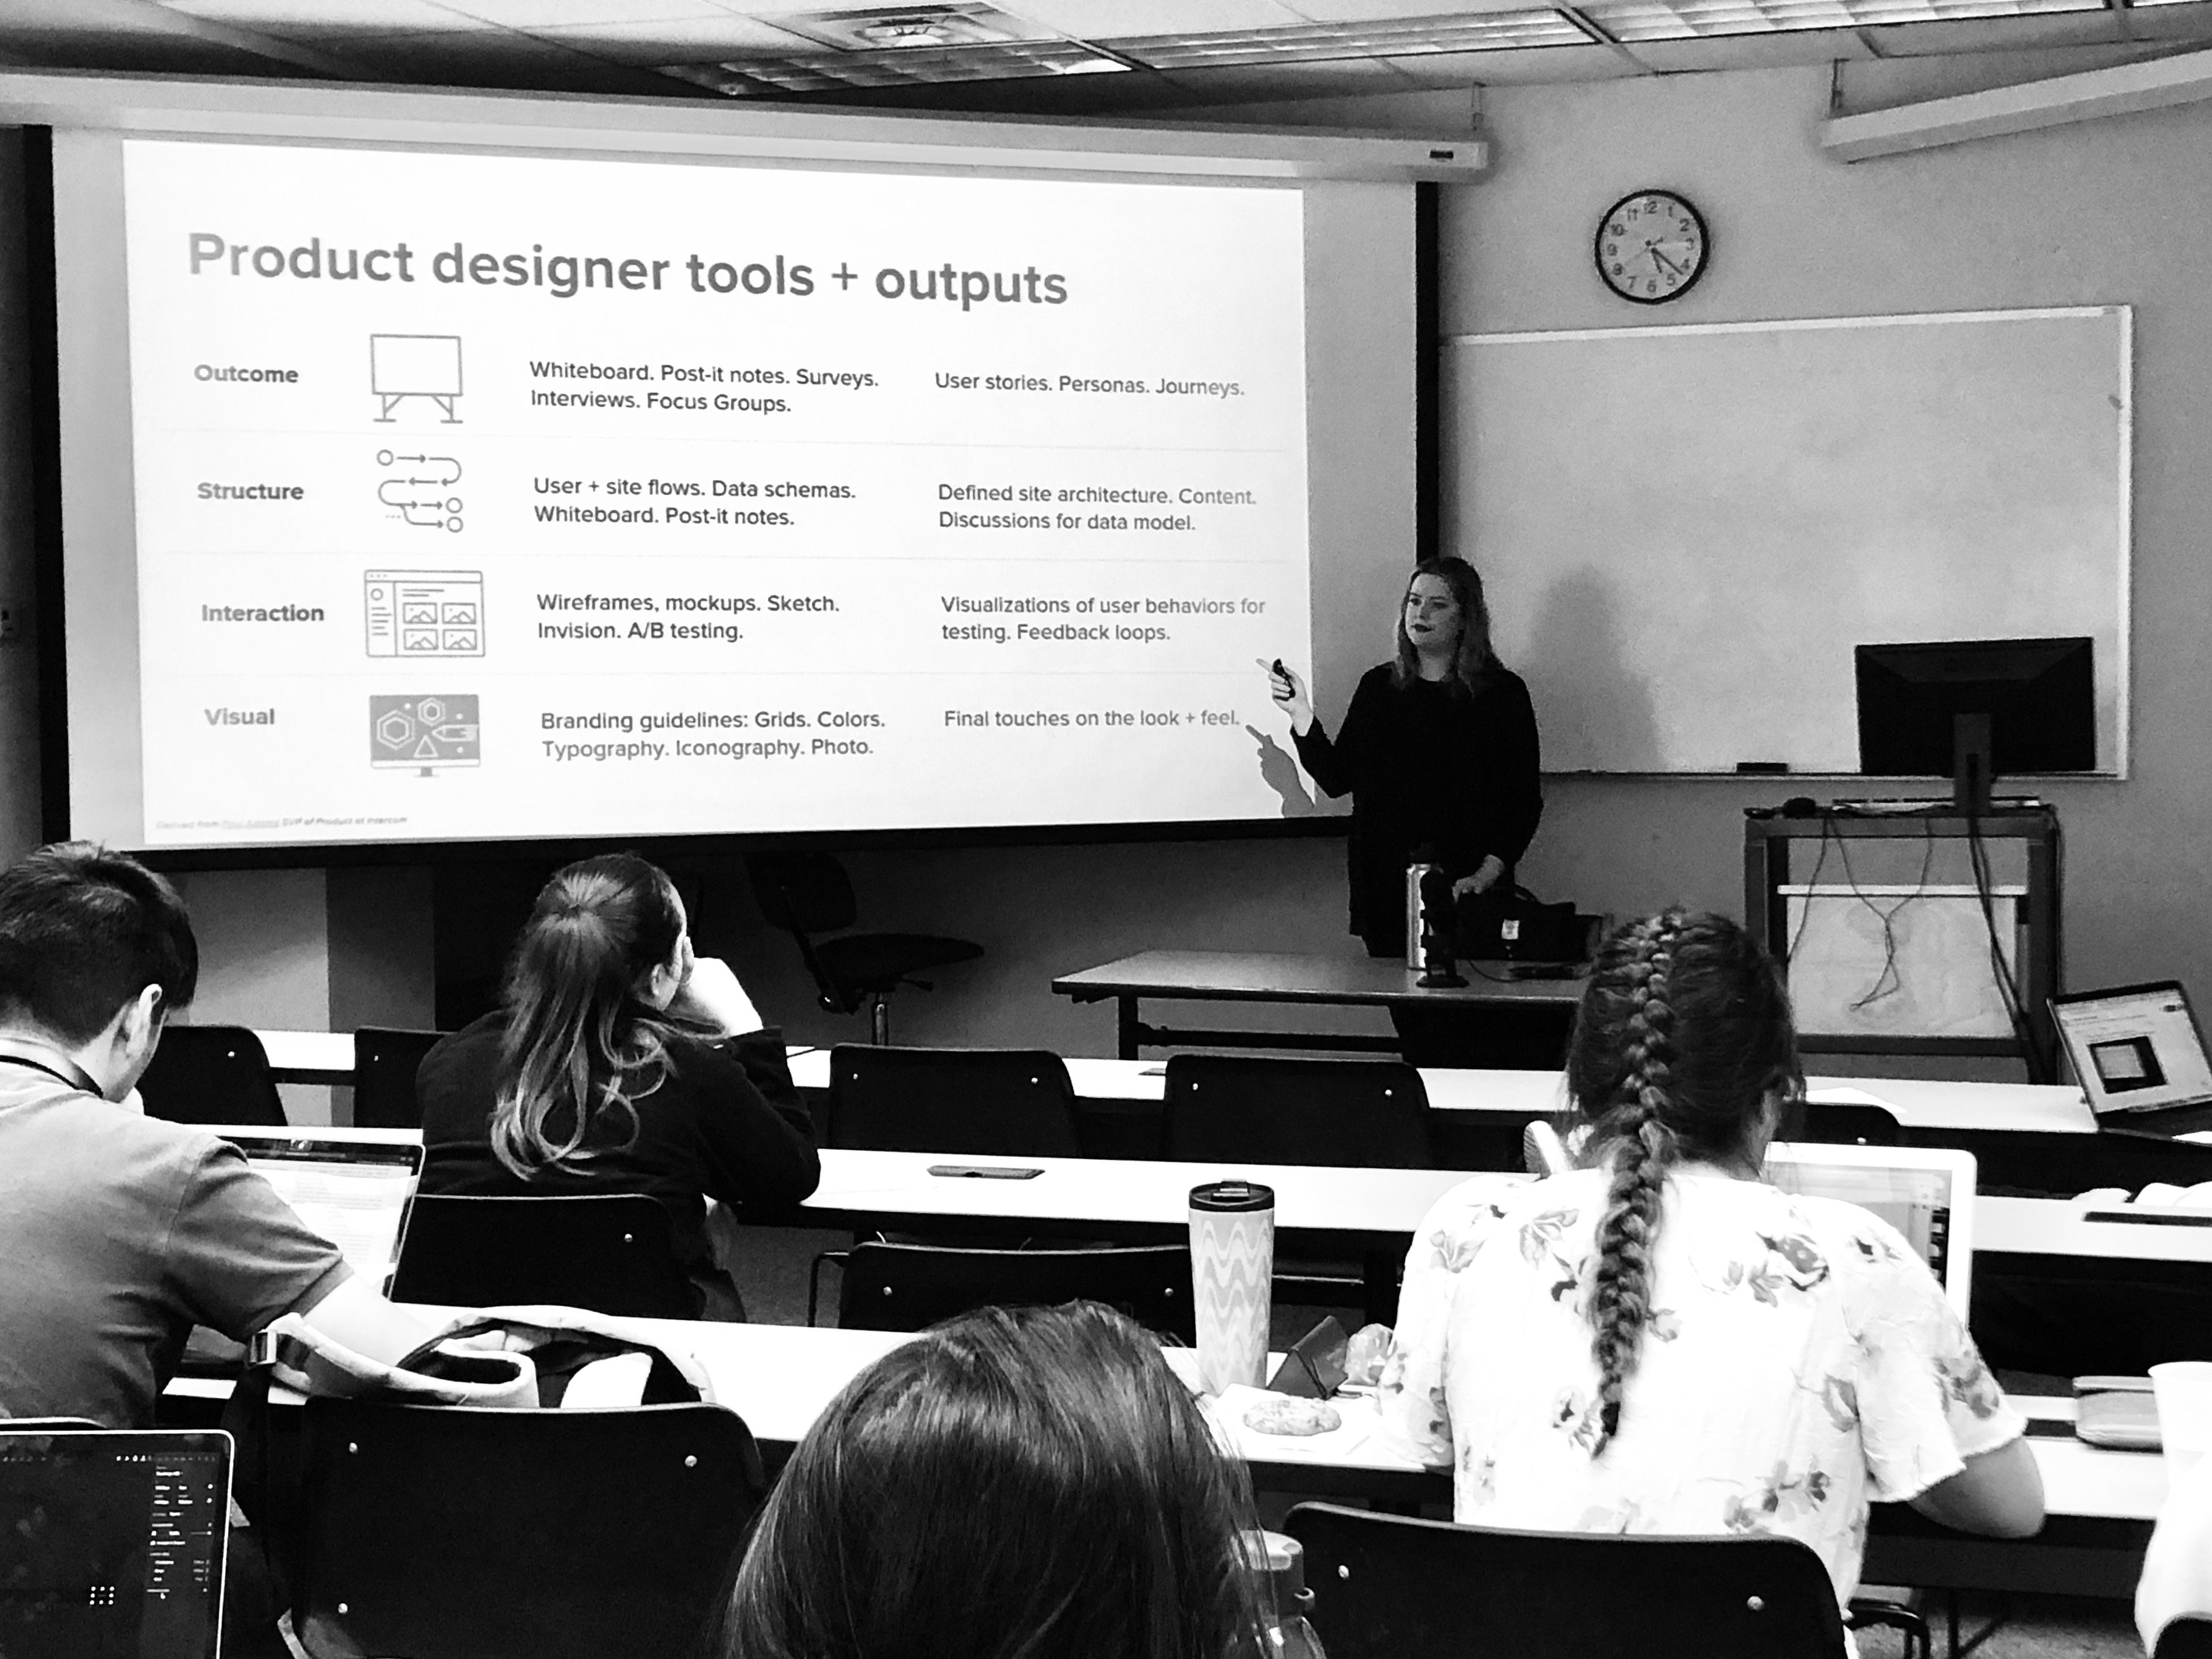 Kelsey Krach guest lecturing on human-centered design at a local university.